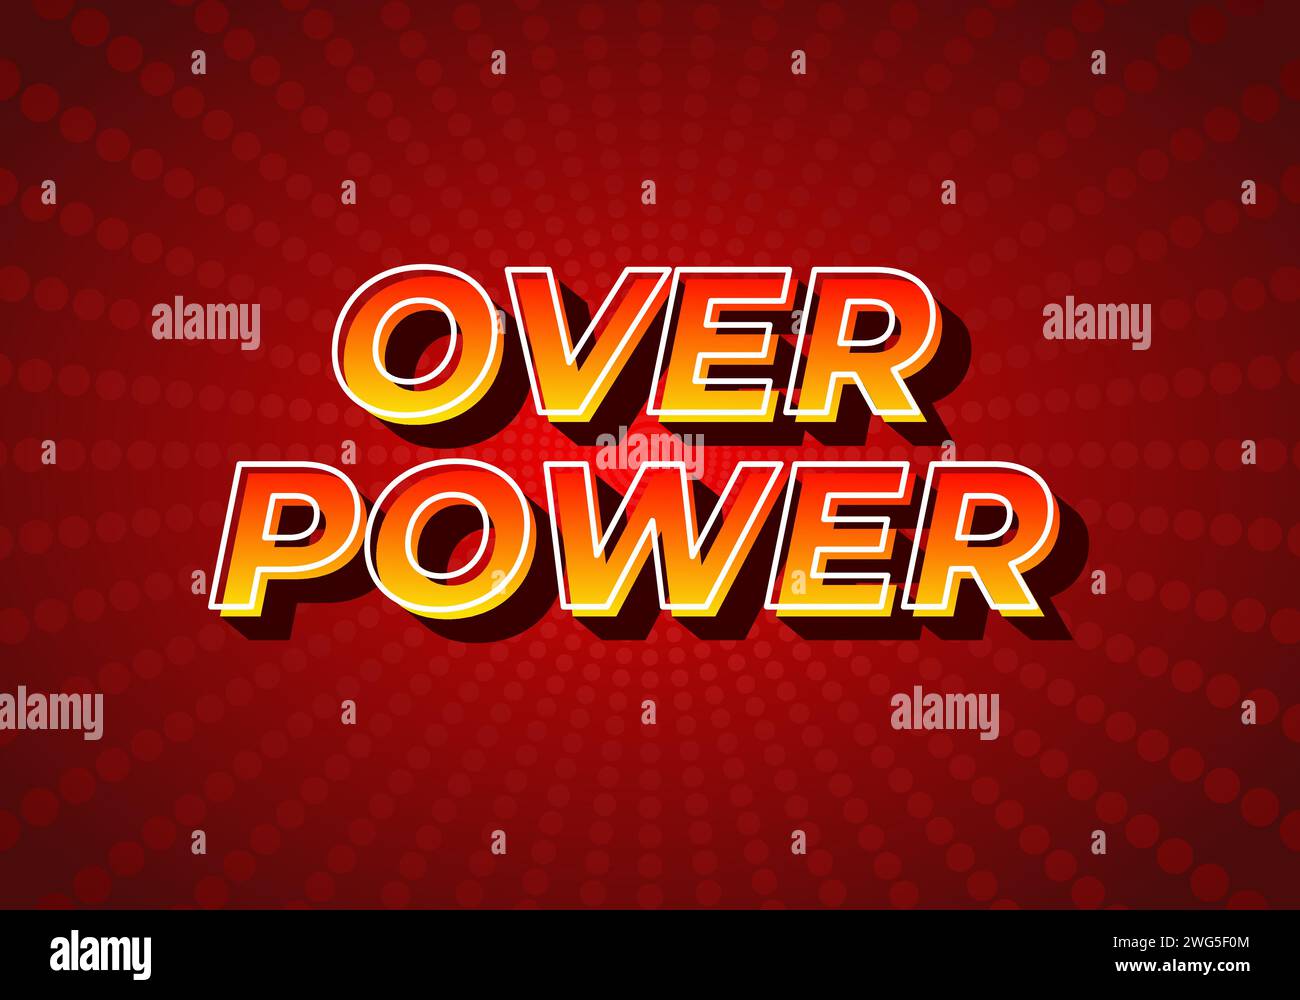 Over power. Text effect design in 3D style, gradient yellow red color. Dark red background Stock Vector